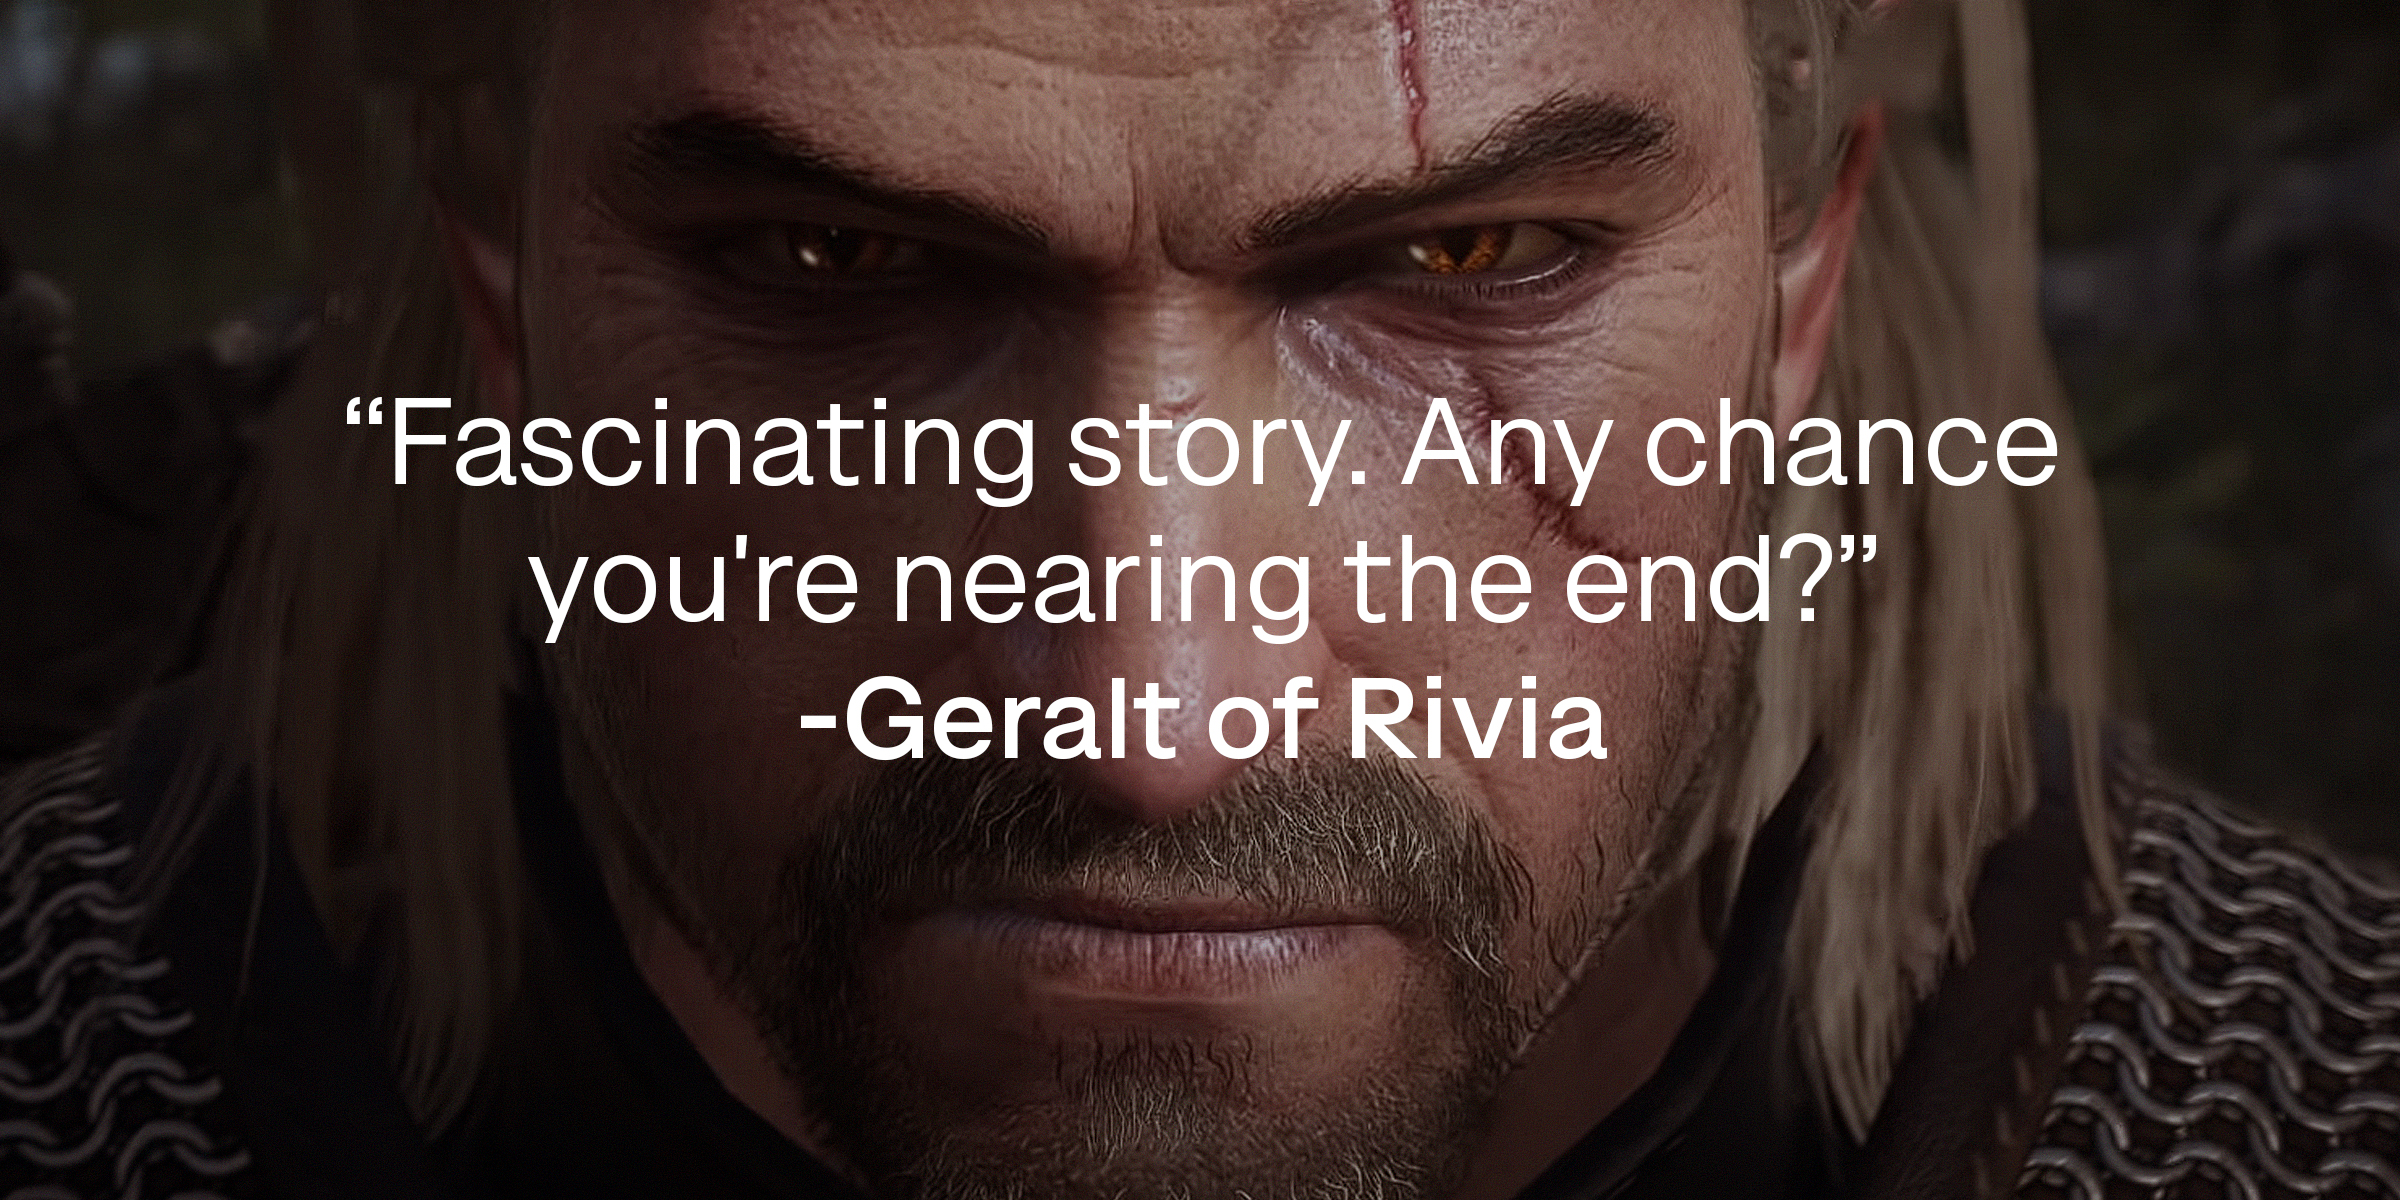 Geralt of Rivia's quote: "Fascinating story. Any chance you're nearing the end?" | Source: youtube.com/CDPRED